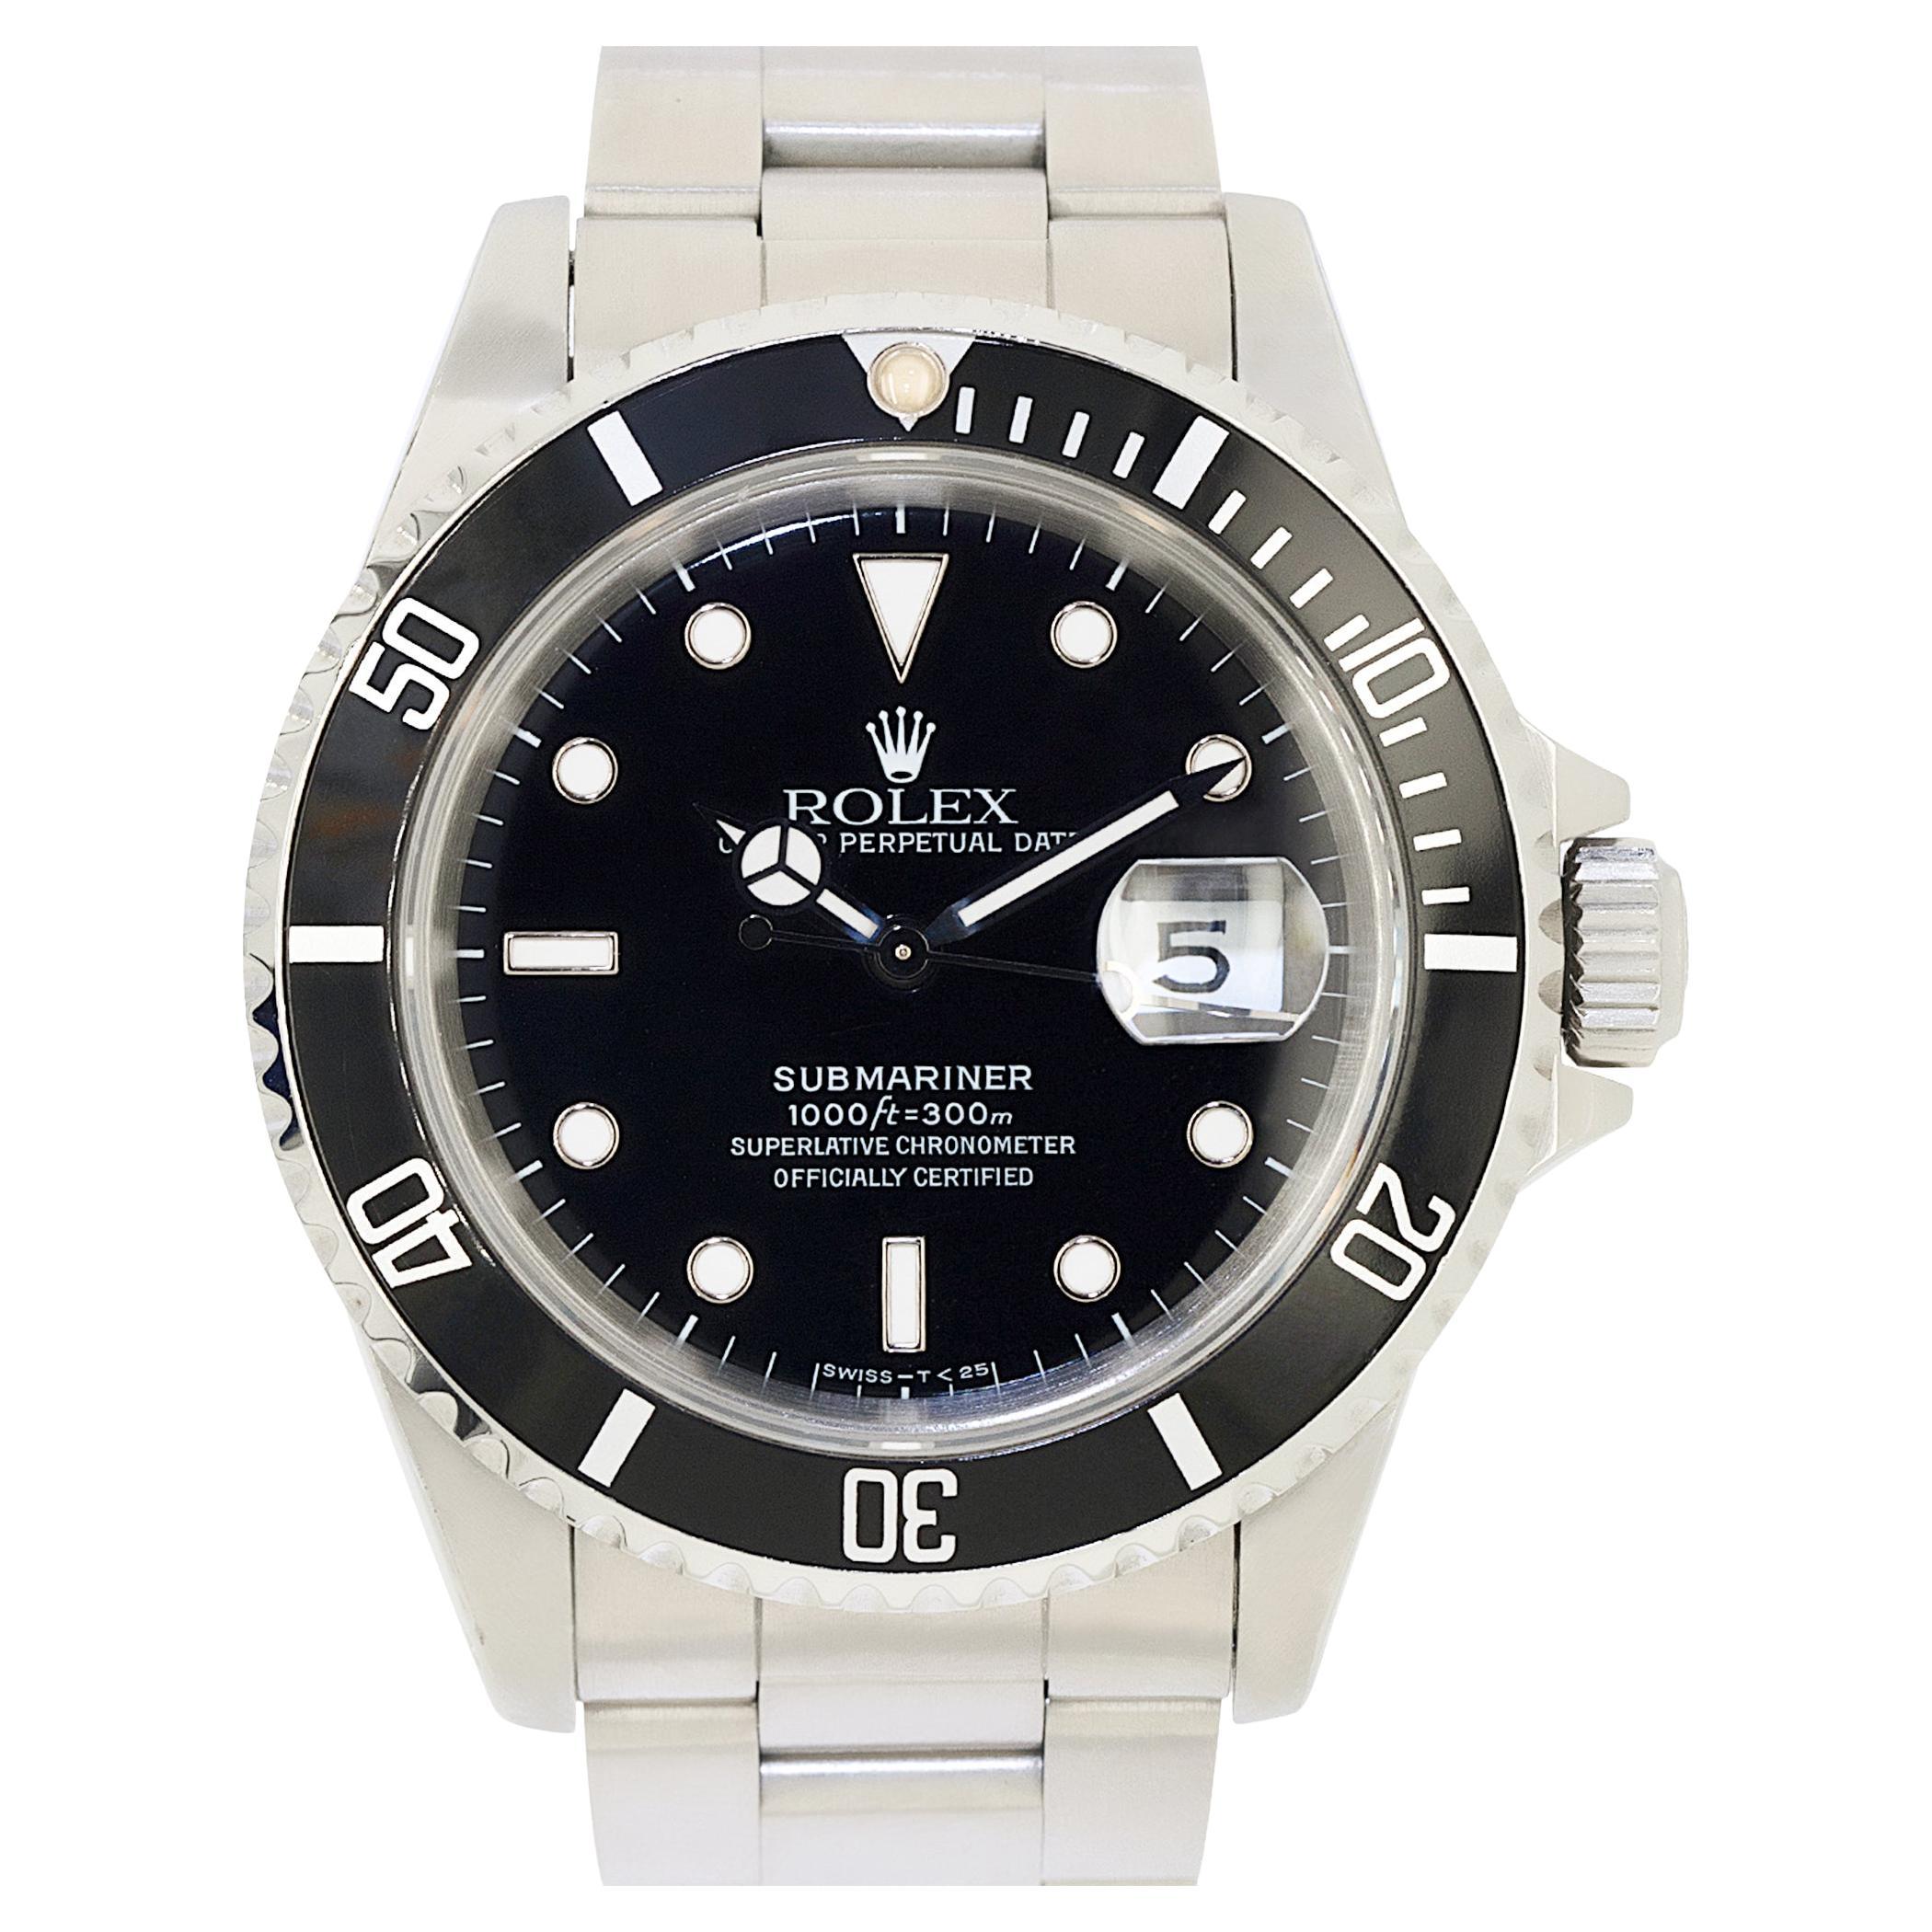 Rolex Submariner 16610 Stainless Steel Automatic Men's Watch